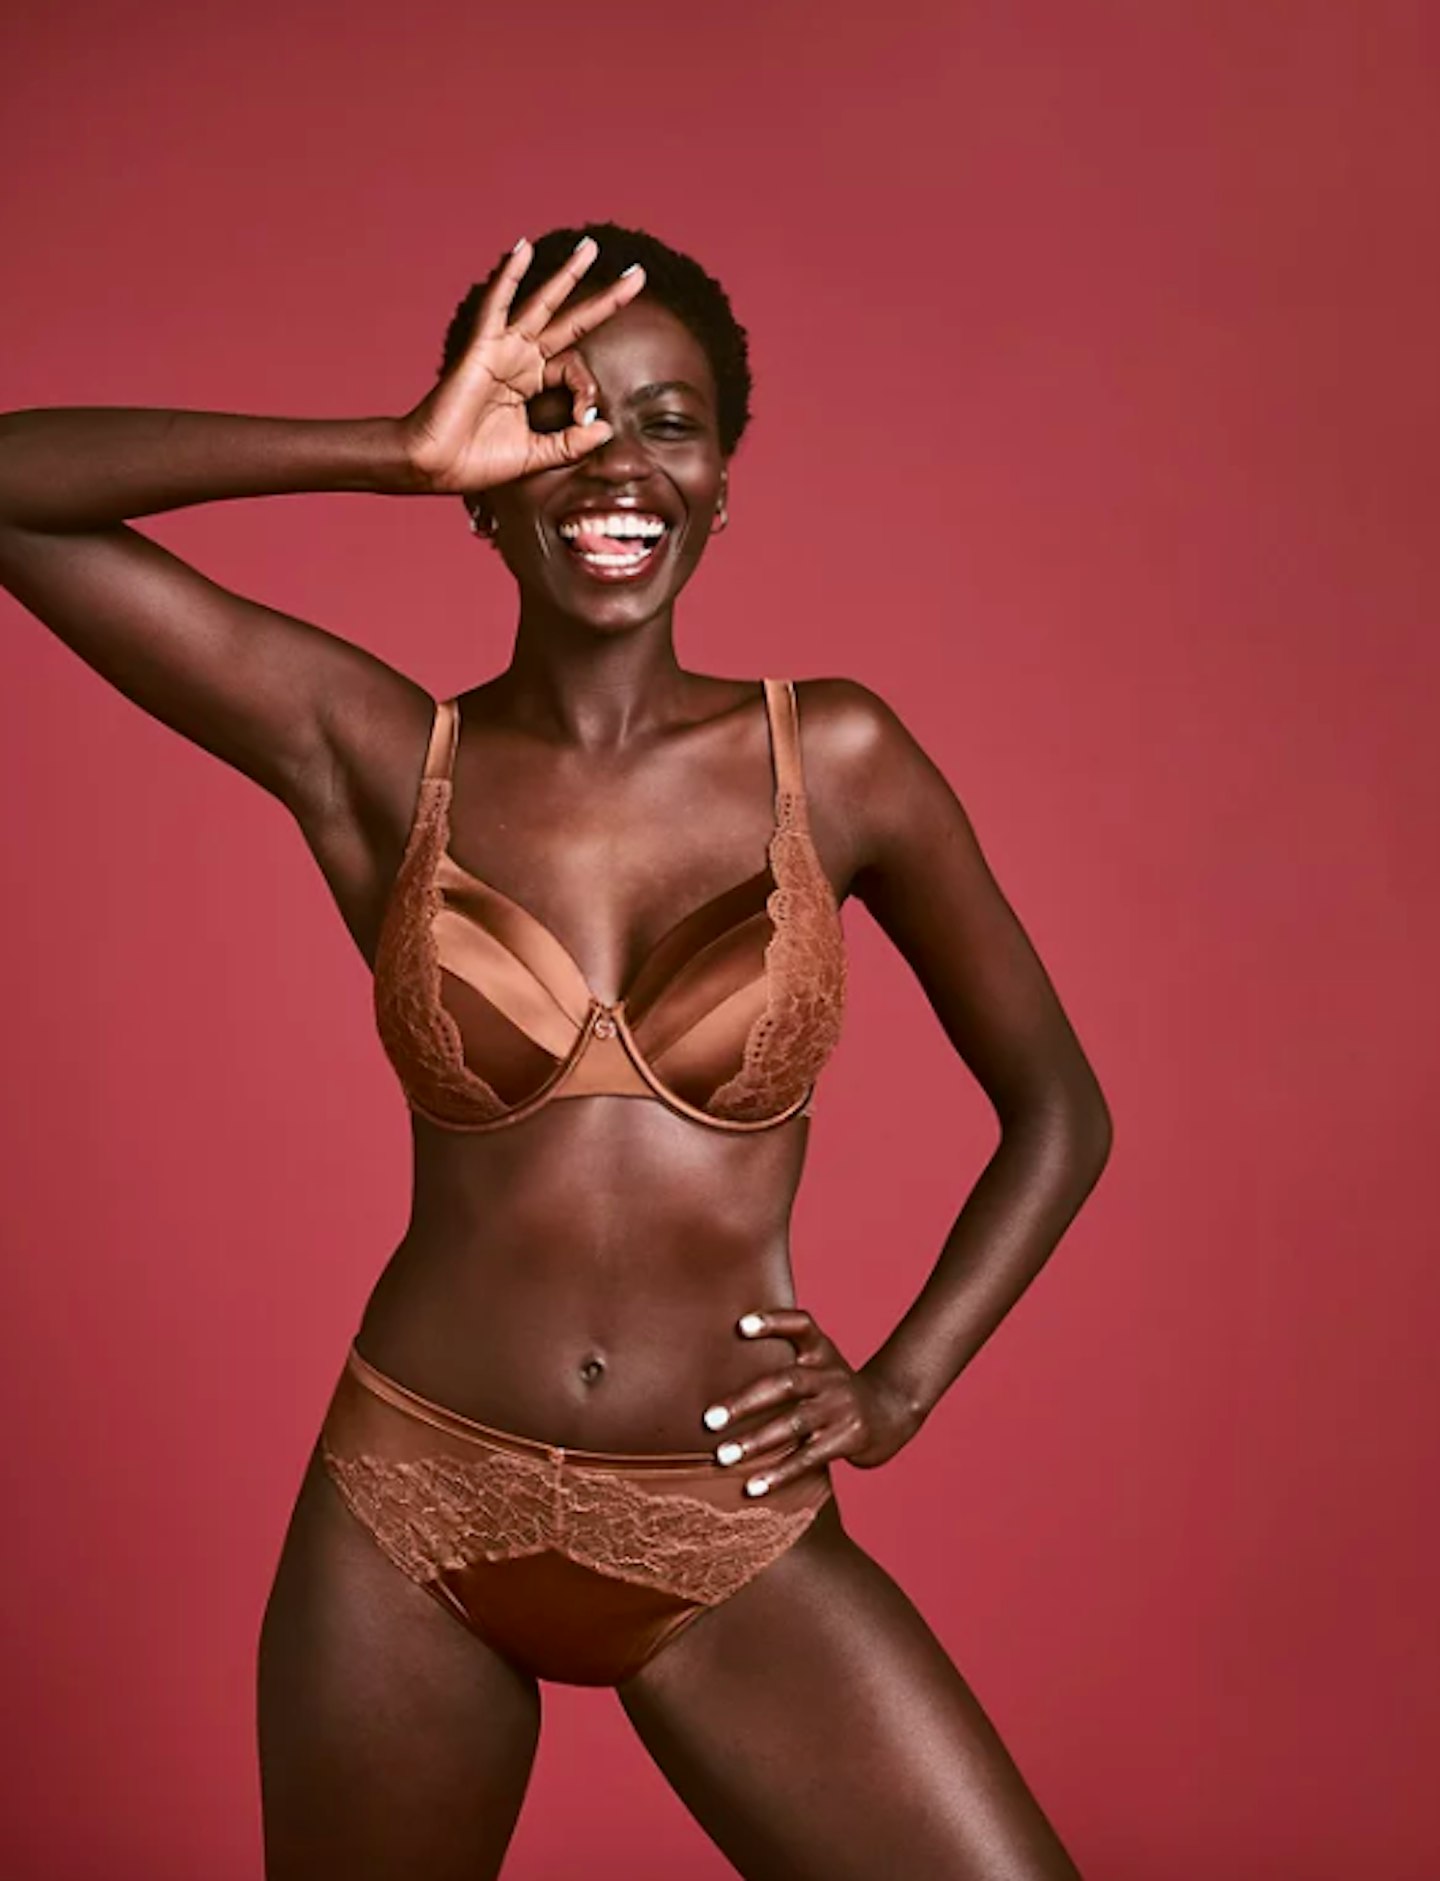 M&S launches 'new neutrals' lingerie line with inclusive skin tone